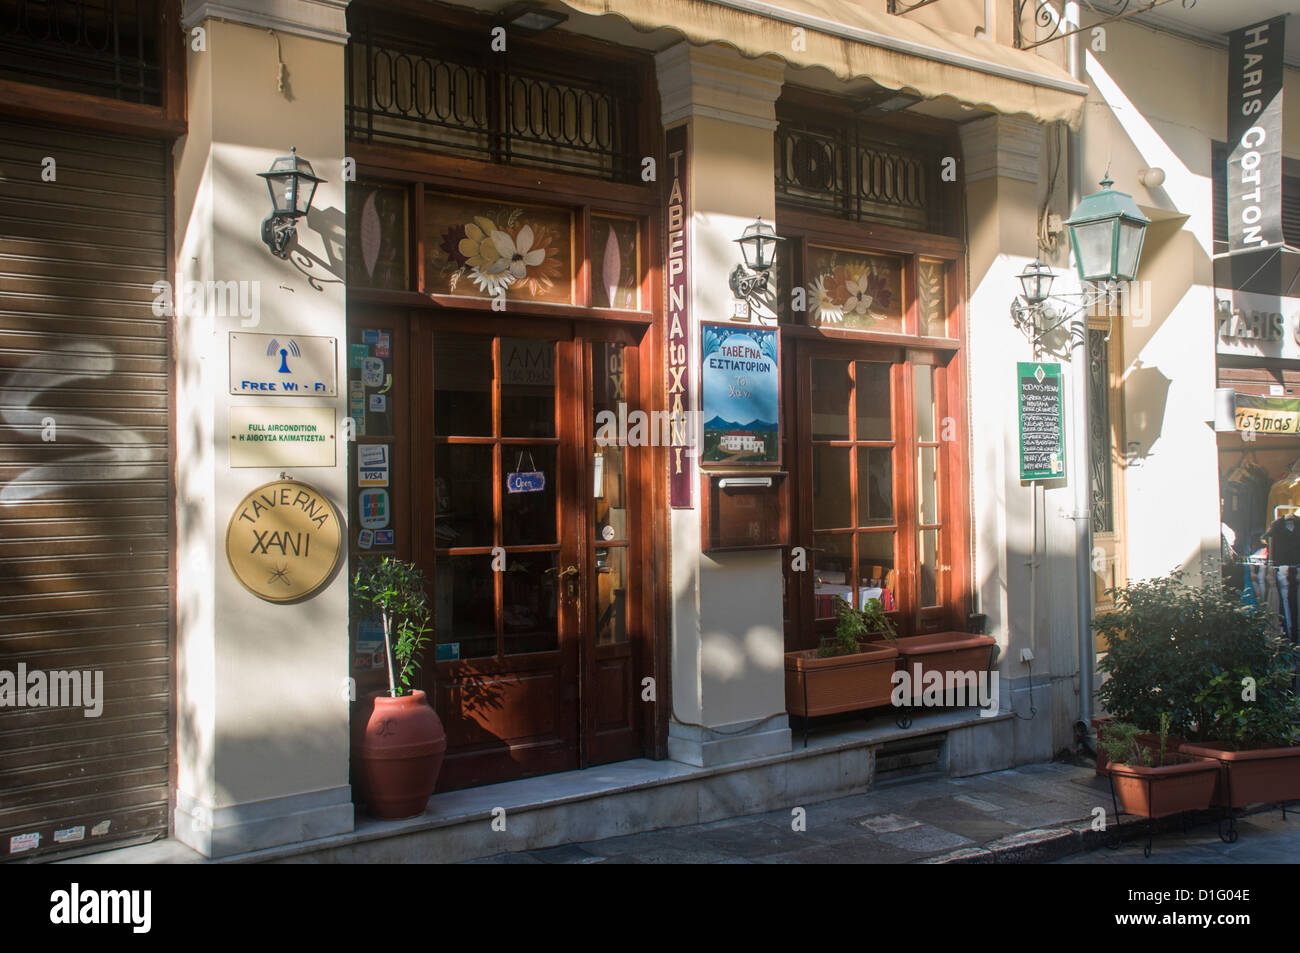 A Taverna sign in Greek in the Narrow Mnisikleous street, Plaka, Athens, Greece Stock Photo